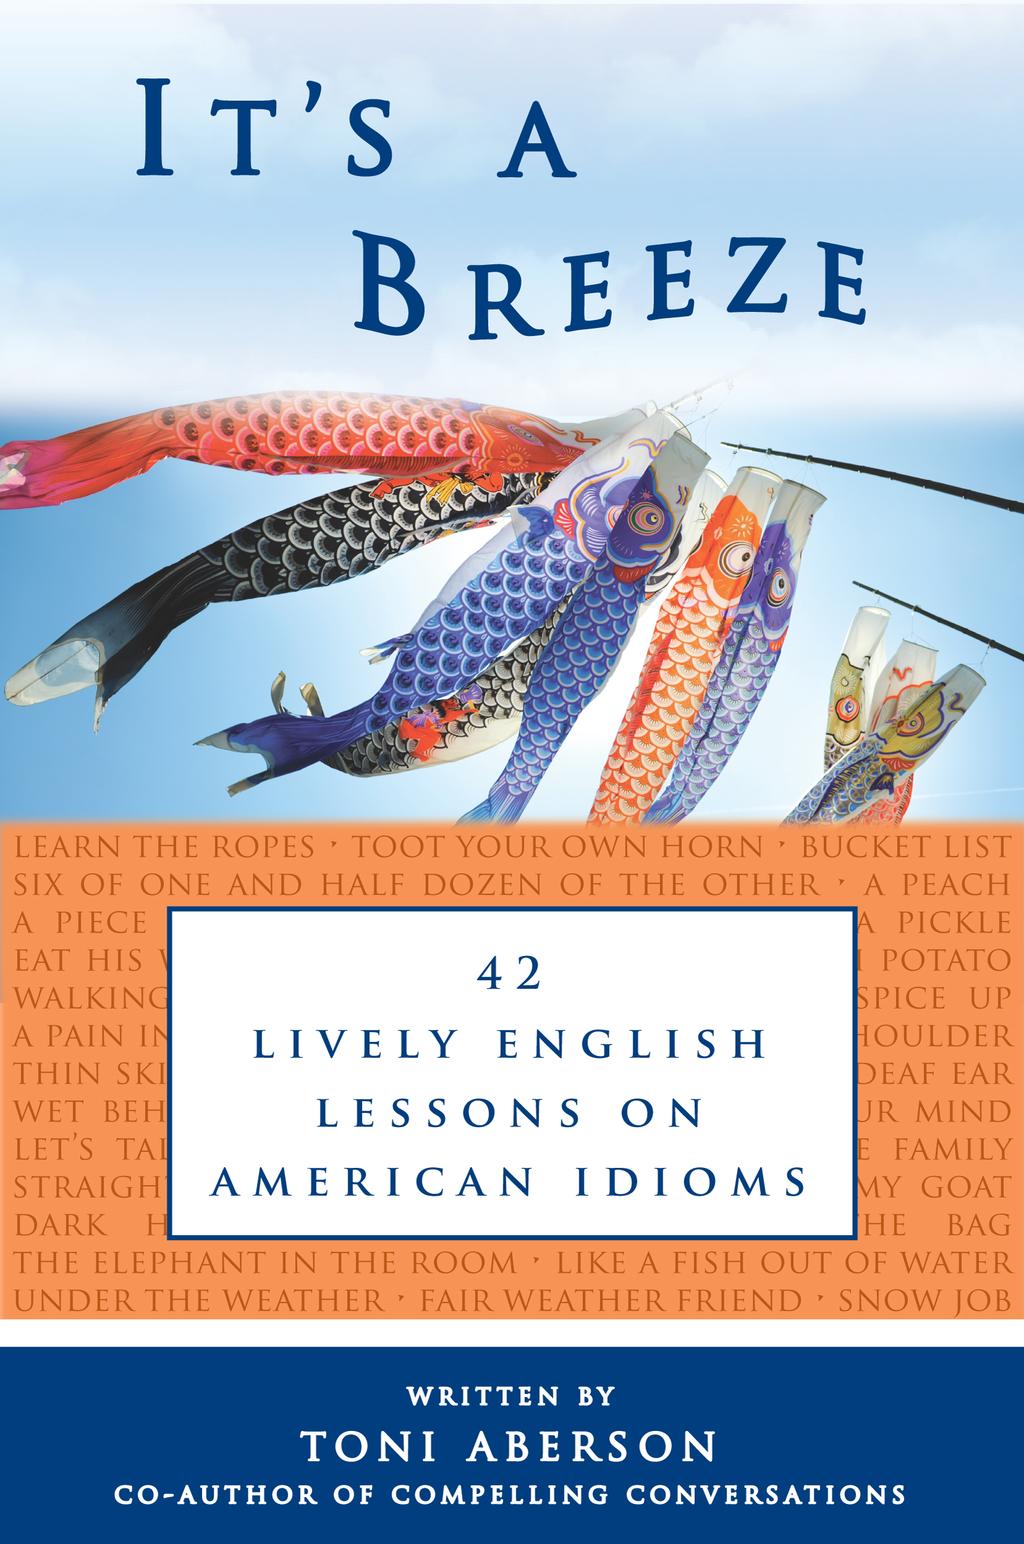 ABOUT THIS BOOK AND CHIMAYO PRESS It s A Breeze: 42 Lively English Lessons on American Idioms explicitly emphasizes American phrases in short, self-contained lessons.